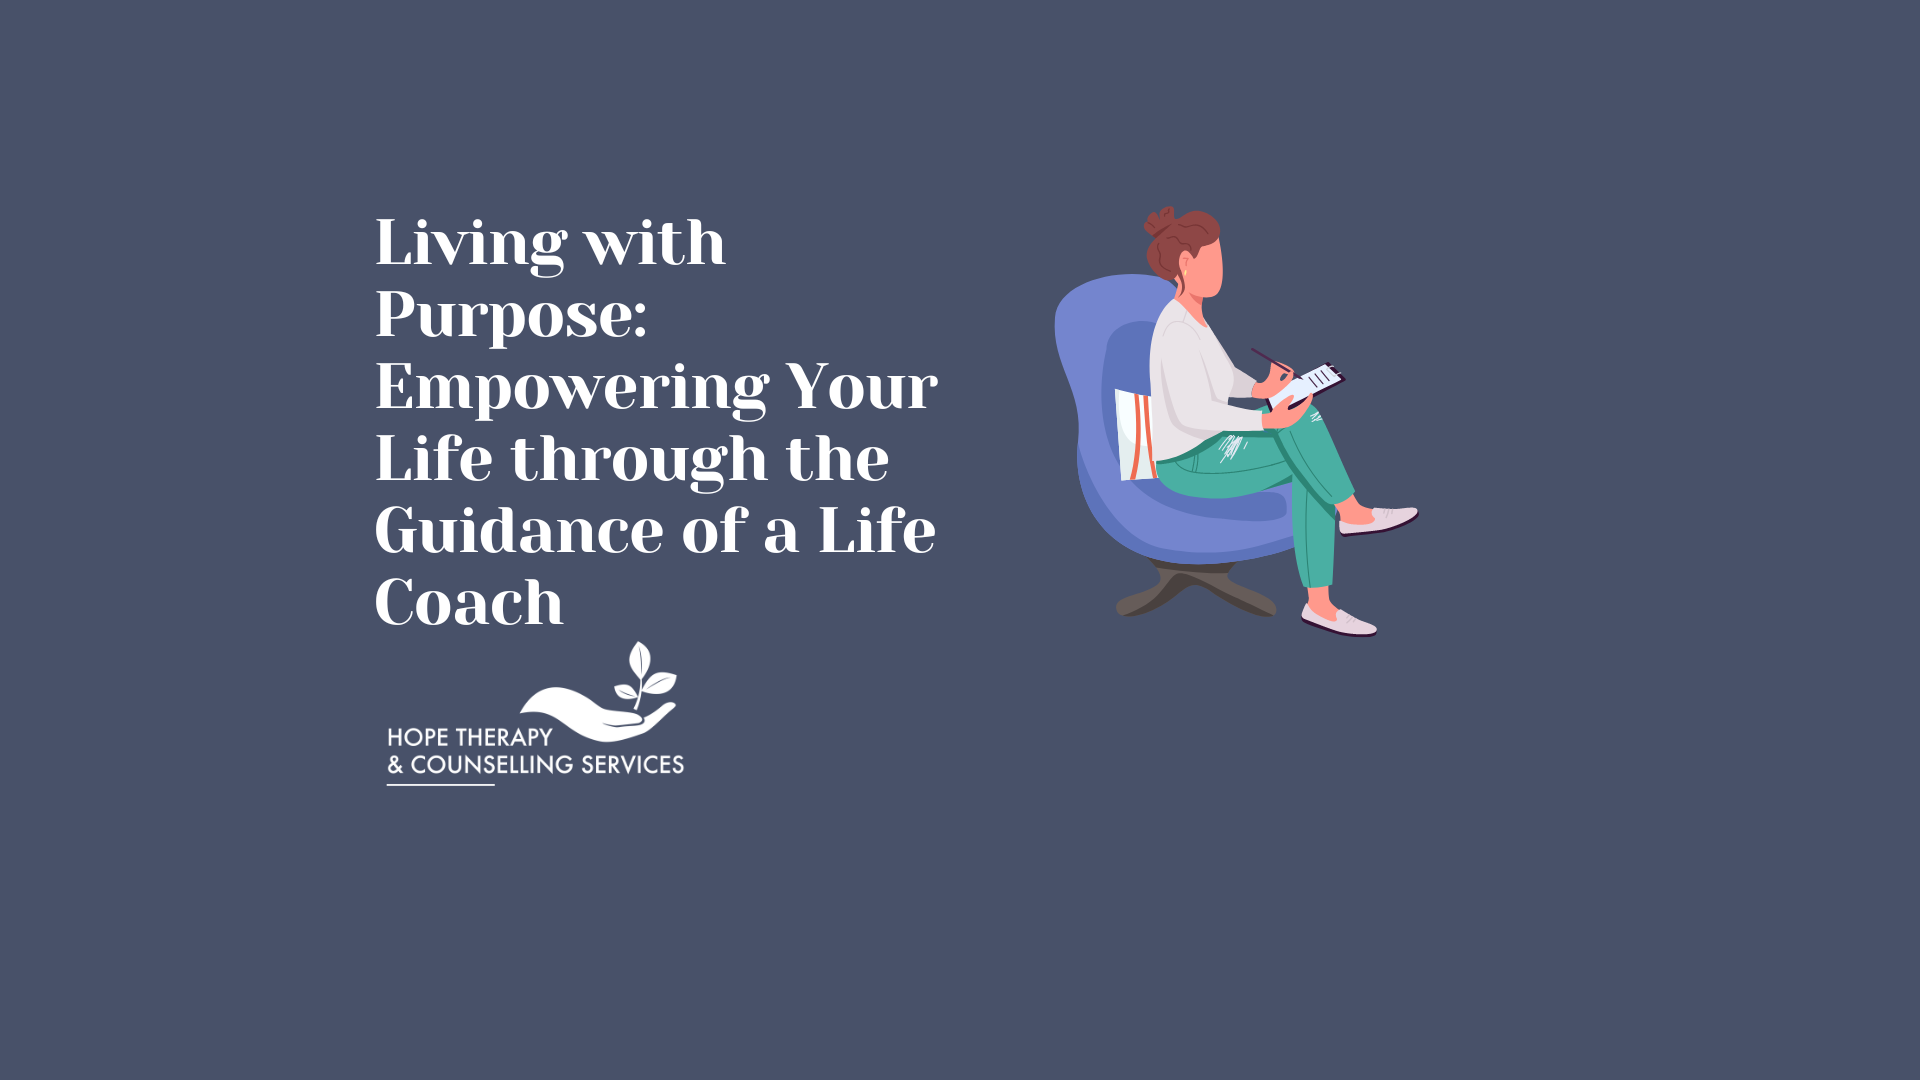 Living with Purpose: Empowering Your Life through the Guidance of a Life Coach